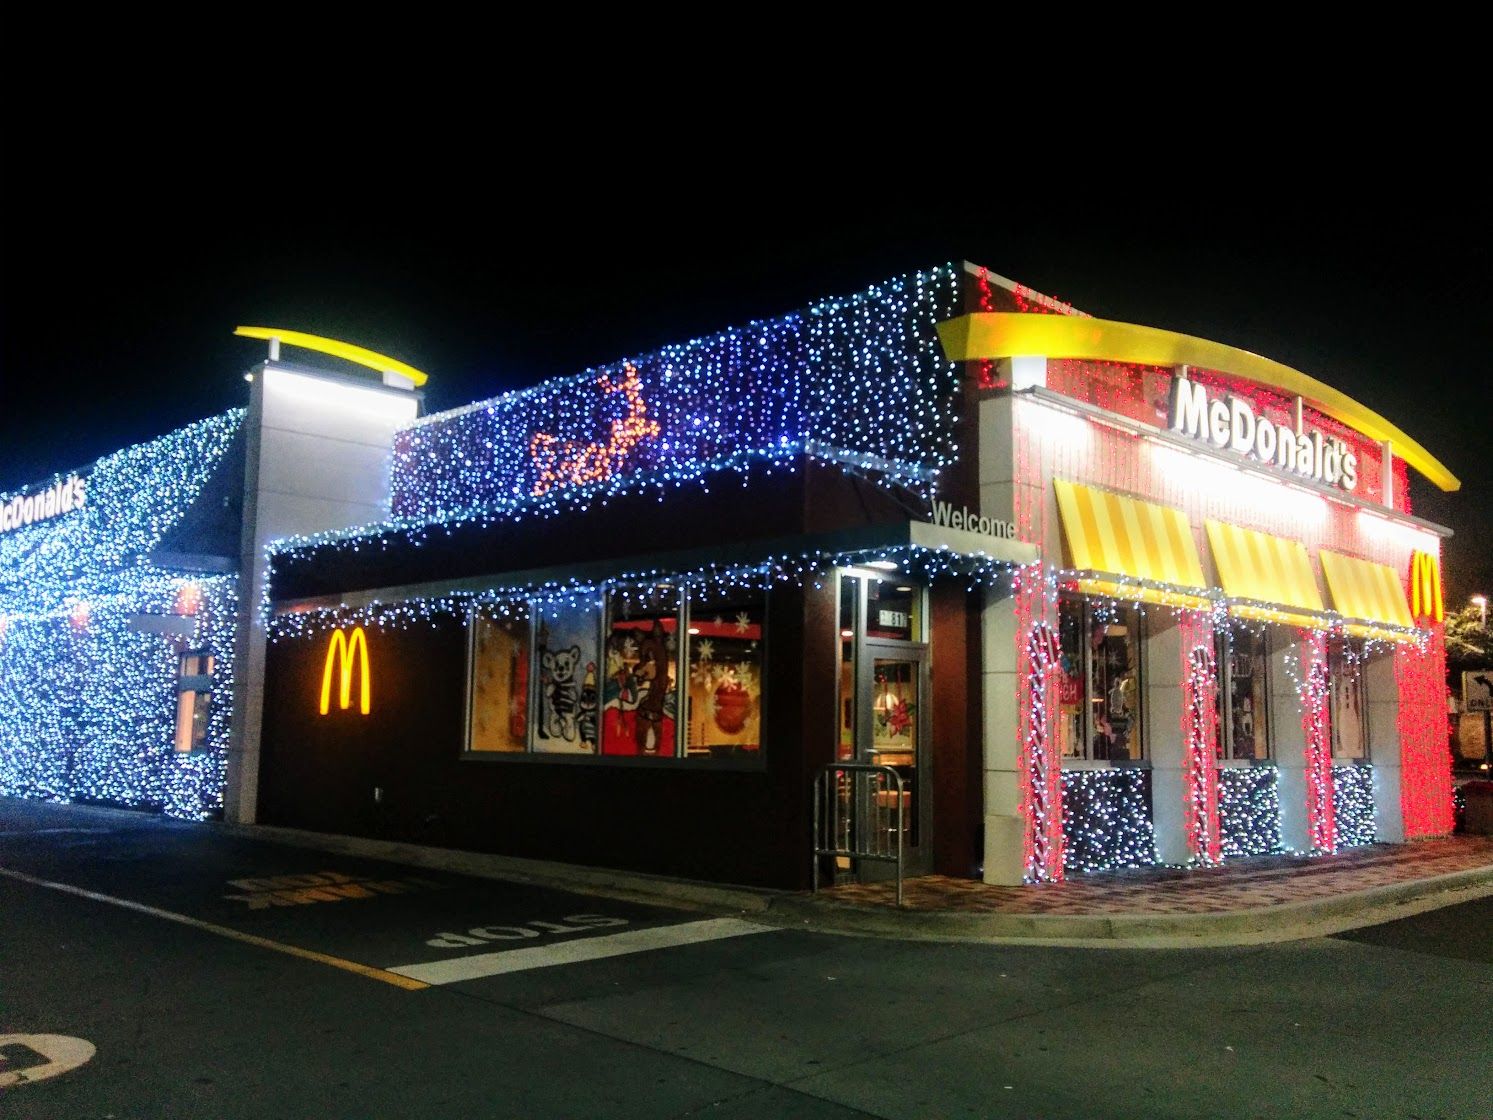 Especial invierno Orbita This Is the Most Festively Decorated McDonald's We've Ever Seen - Delish.com